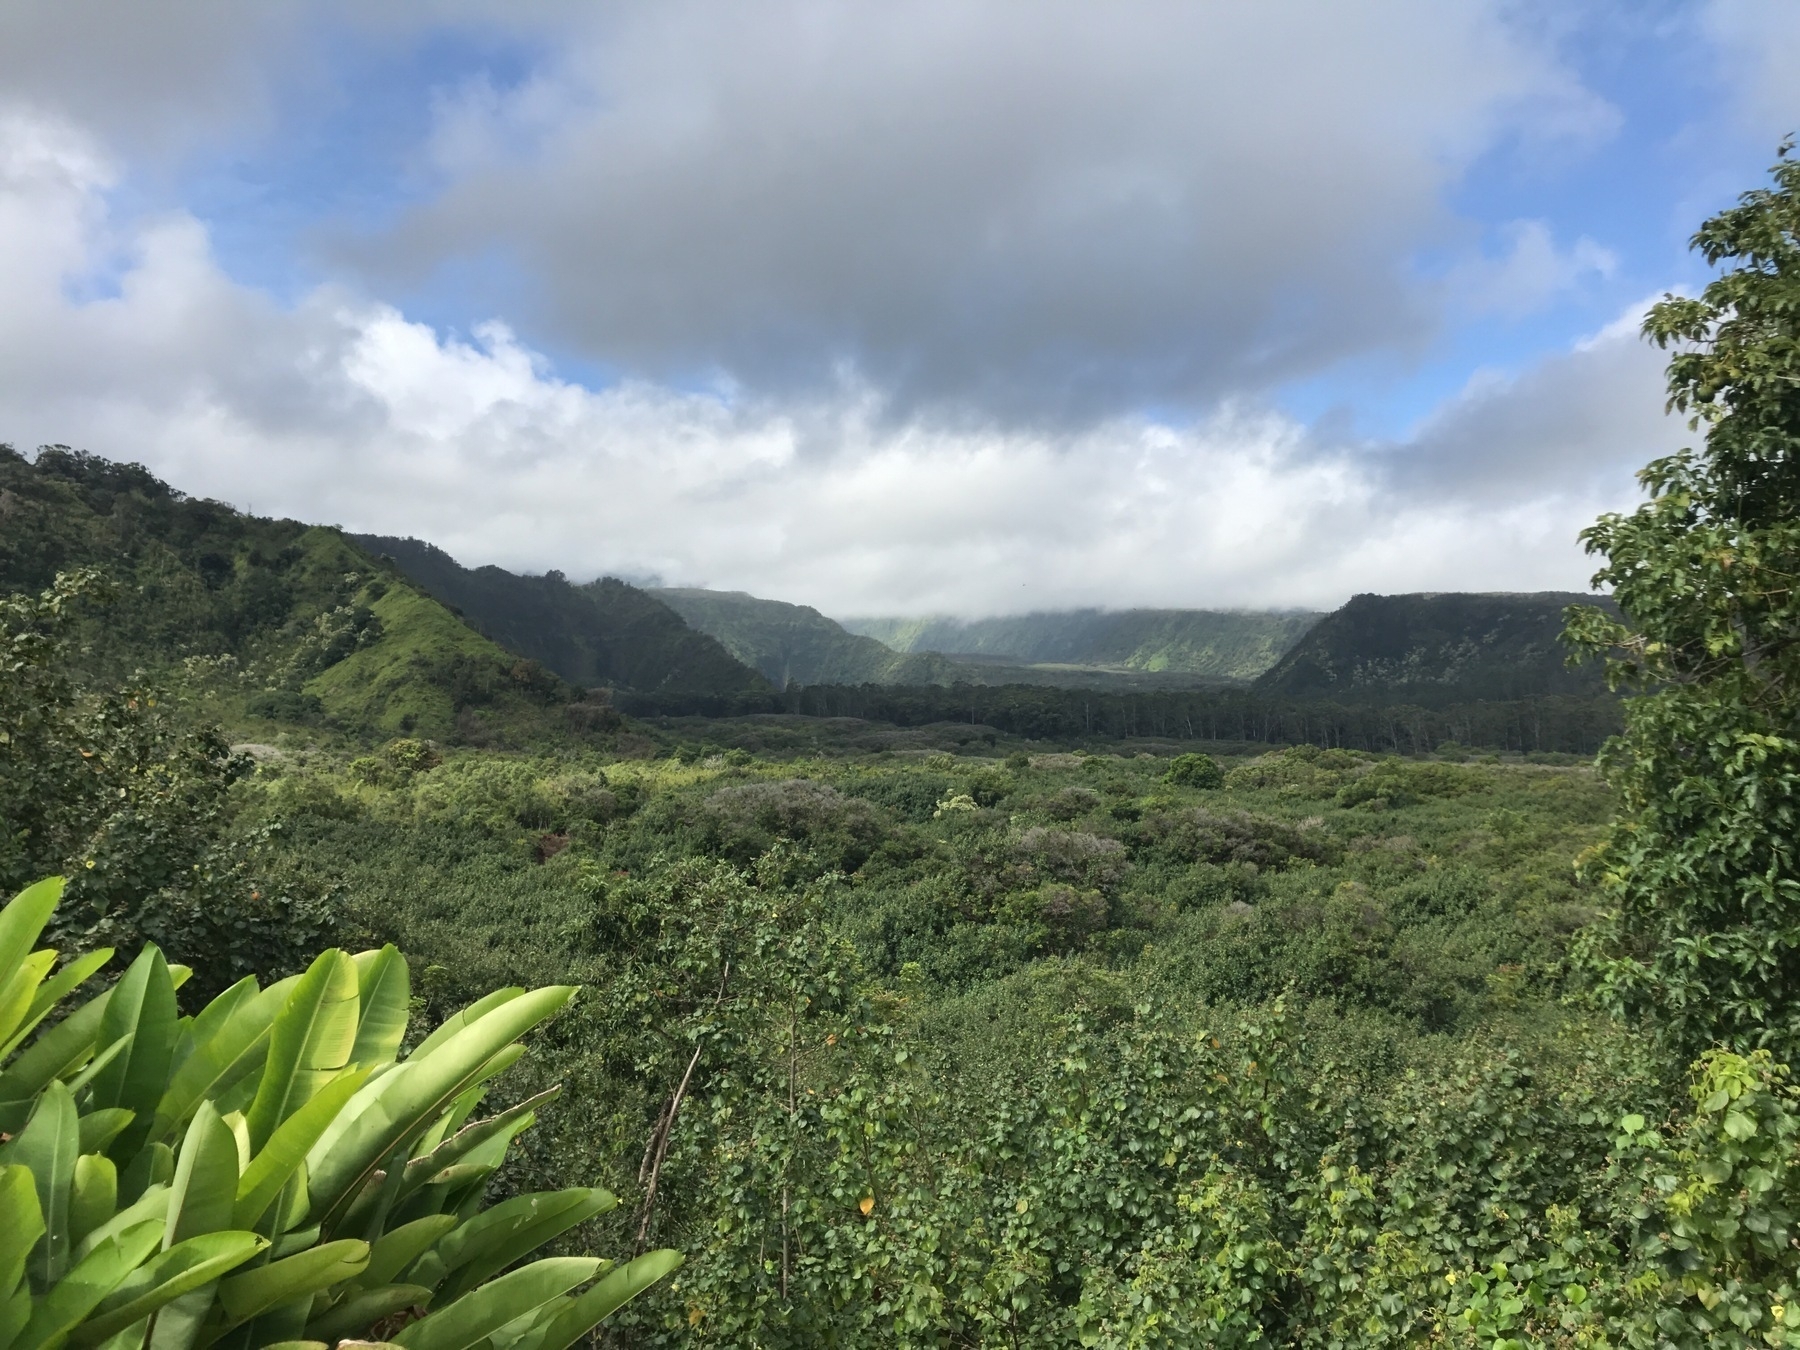 Looking out into a remote and heavily wooded valley on the north east side of Haleakala